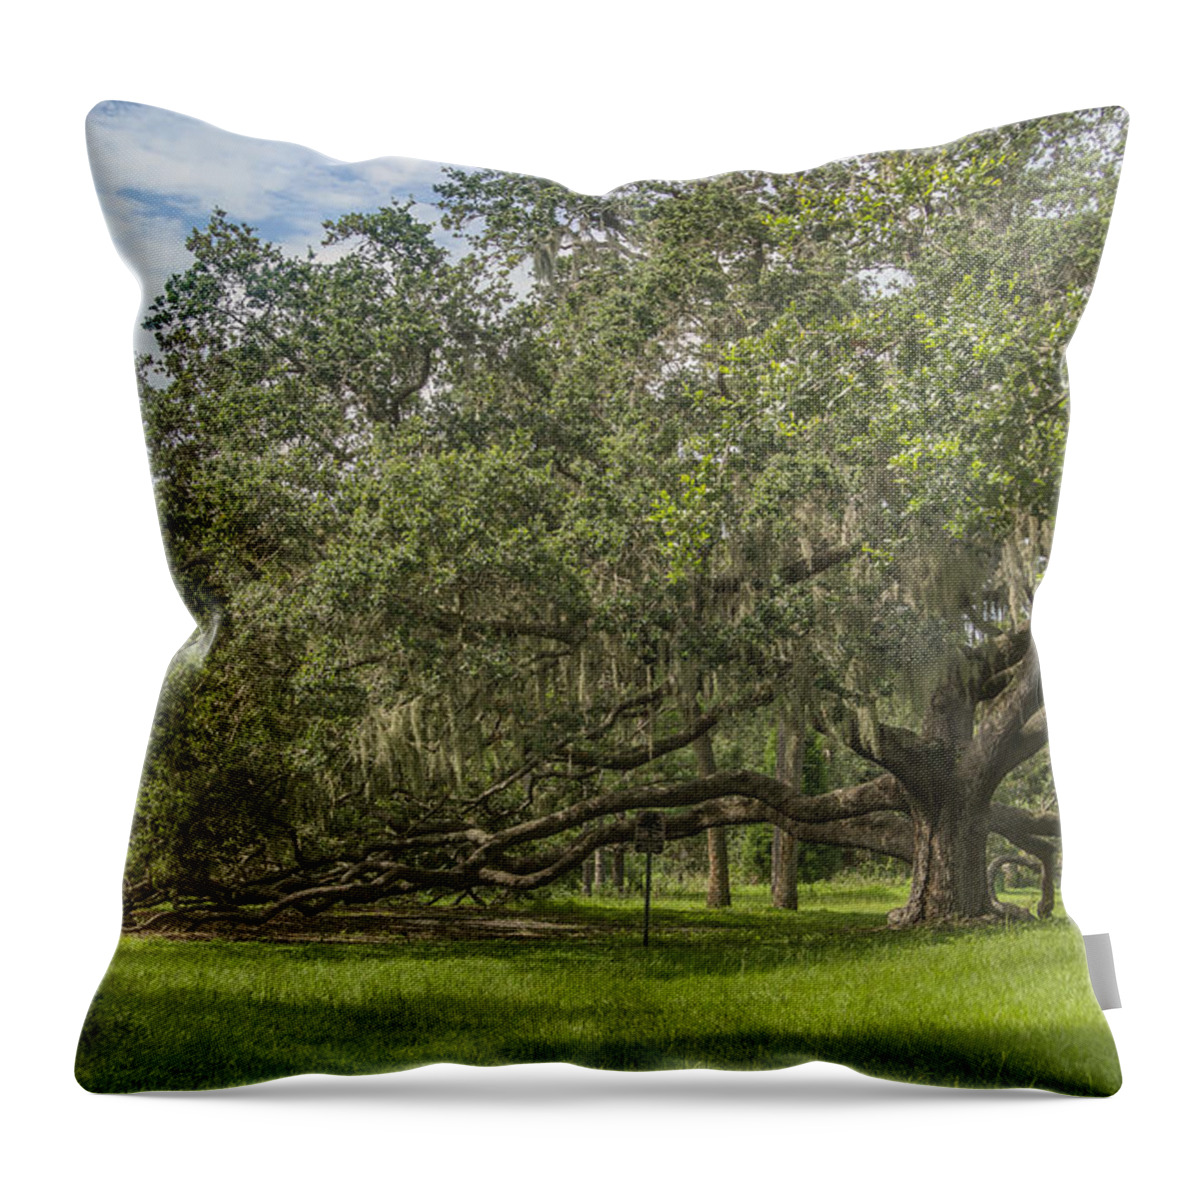 Florida Throw Pillow featuring the photograph Old oak tree by Jane Luxton